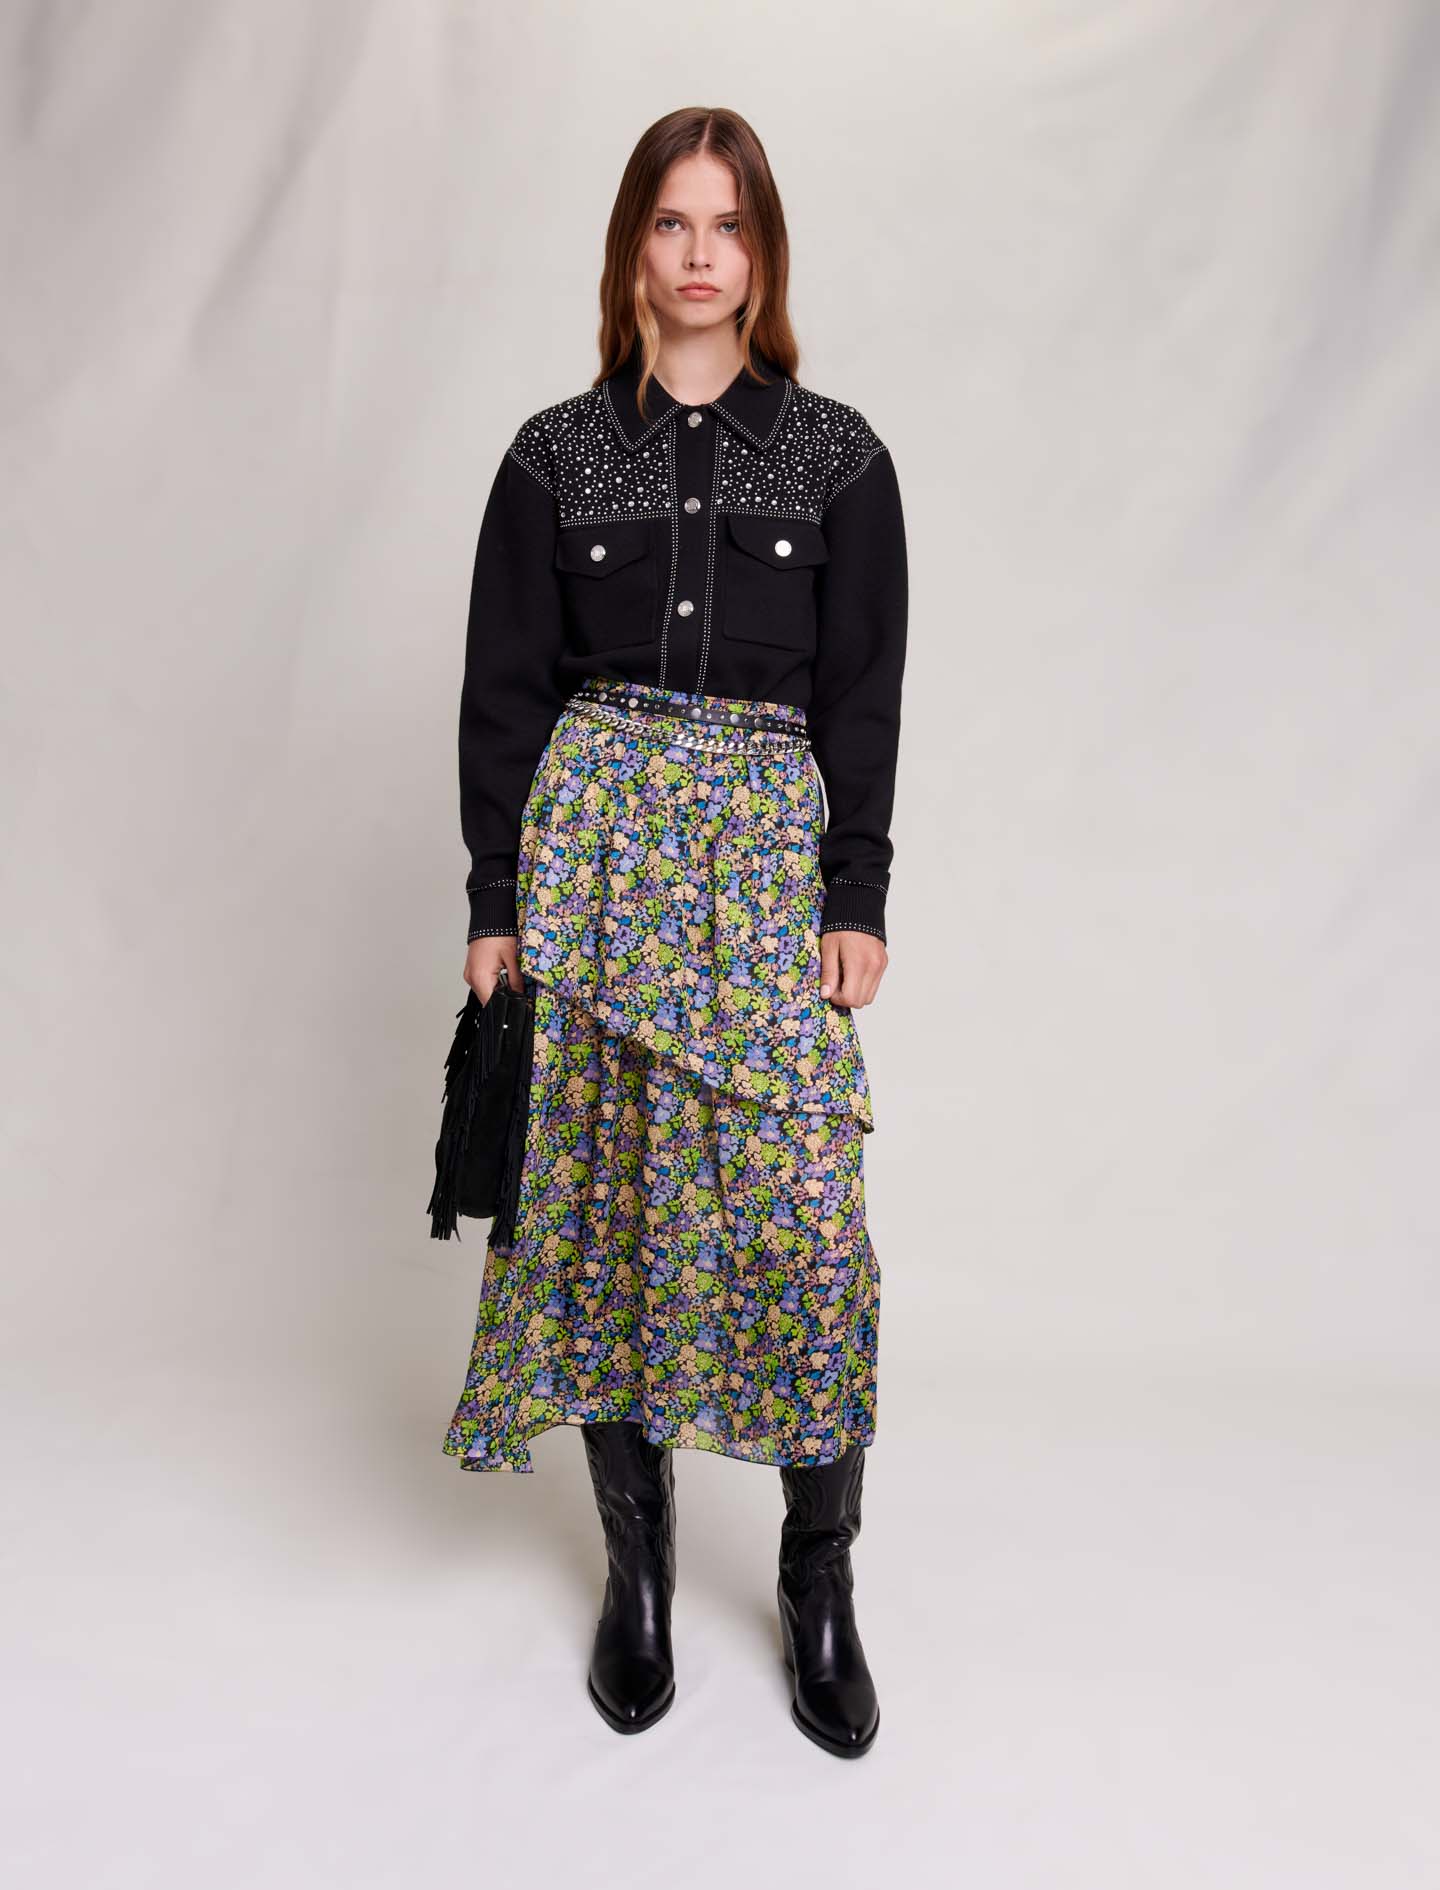 Maje Woman's polyester Long floral skirt for Fall/Winter, in color Primroses Multico Print /